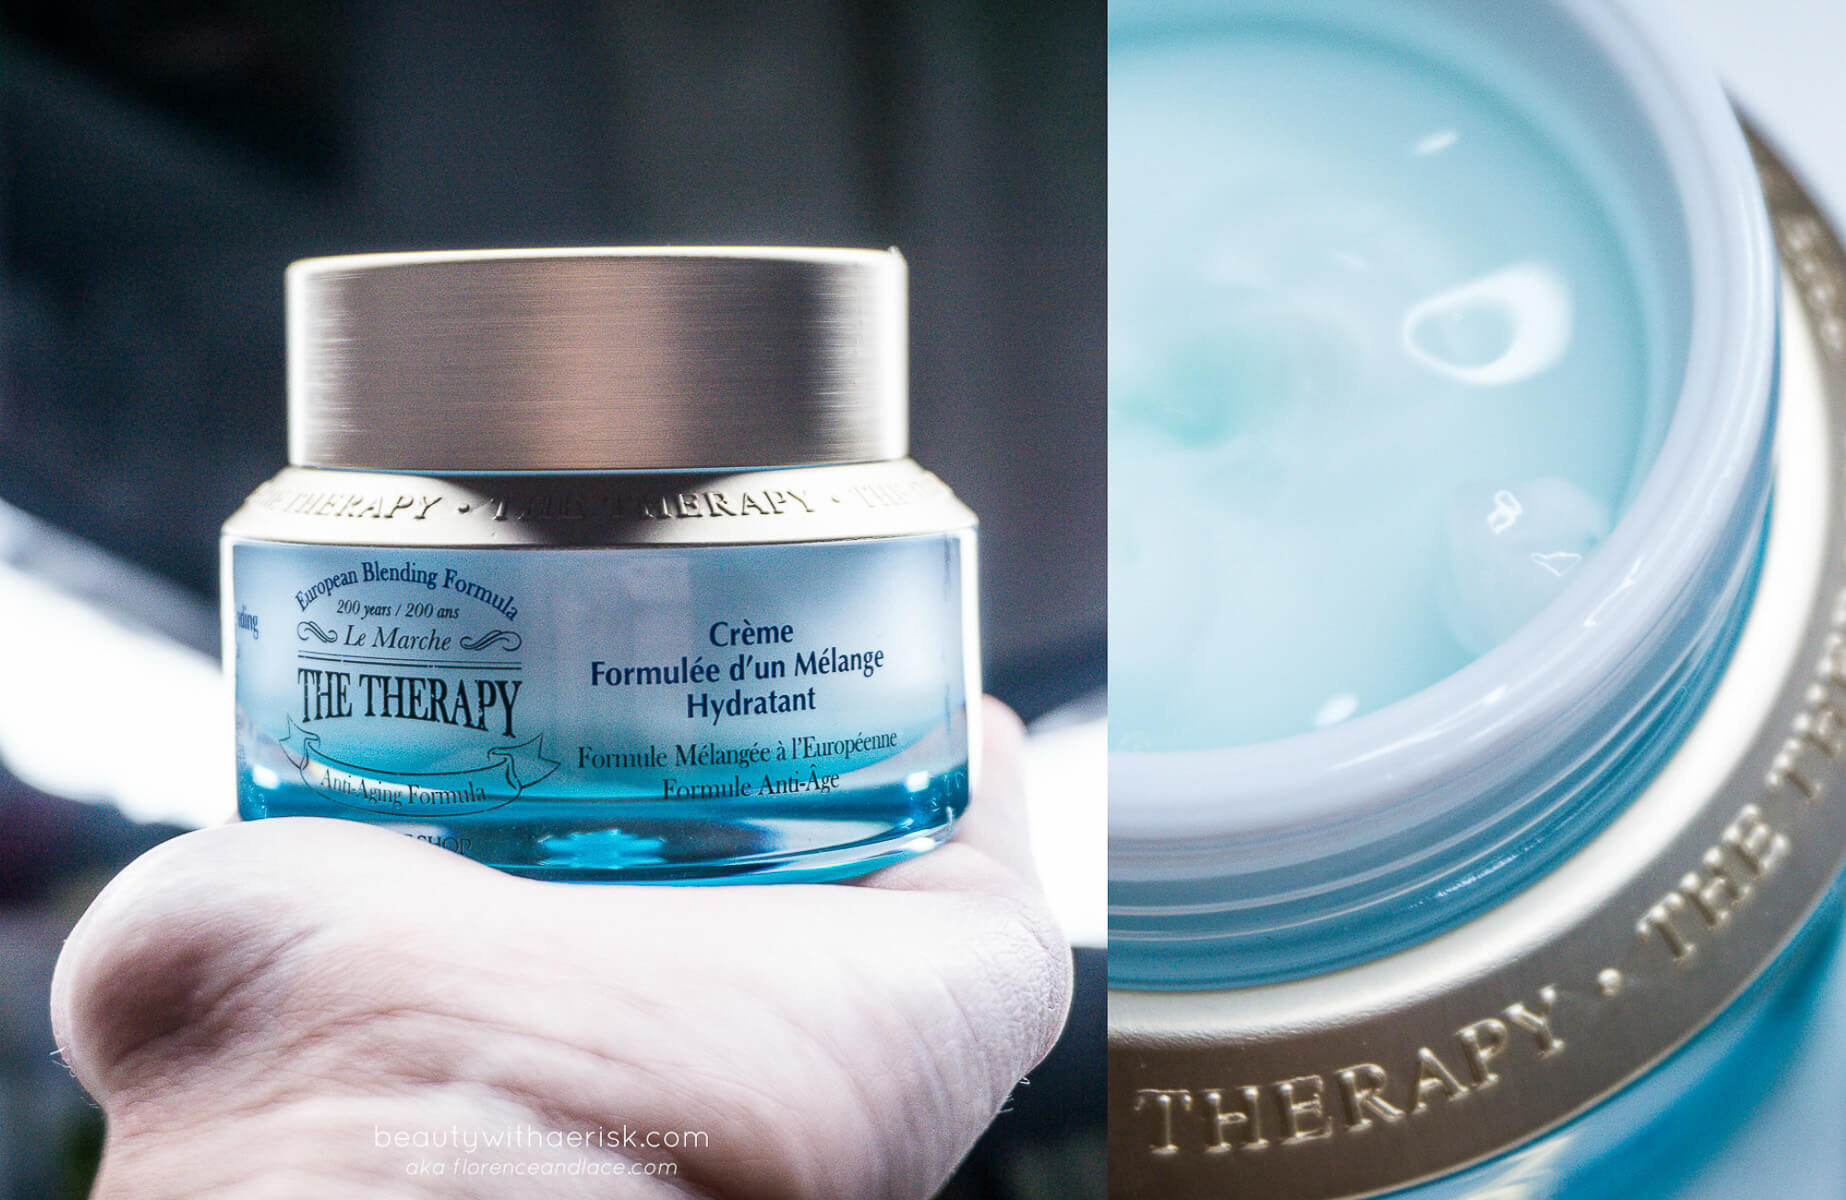 The Face Shop The Therapy Moisture Blending Formula Cream. (1)